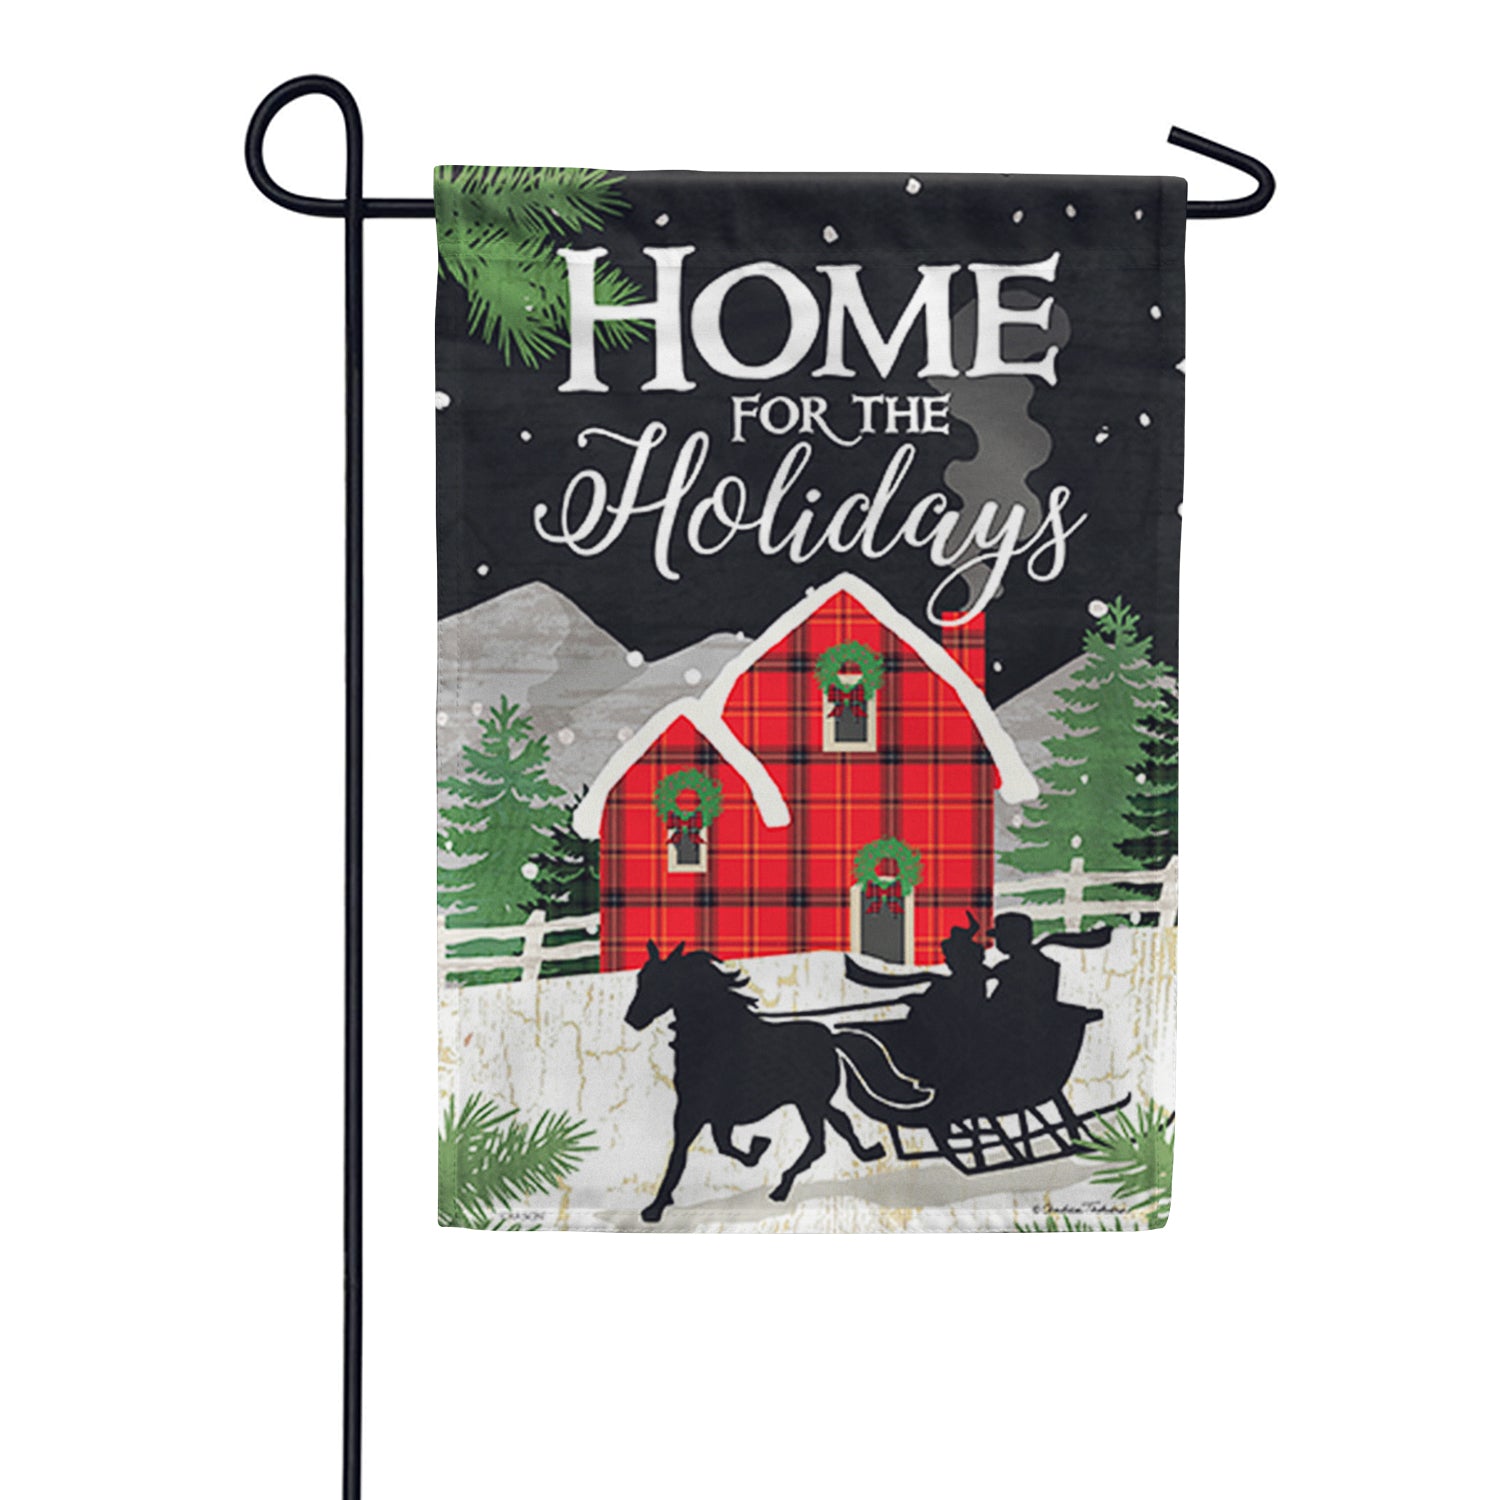 Home for the Holiday Garden Flag